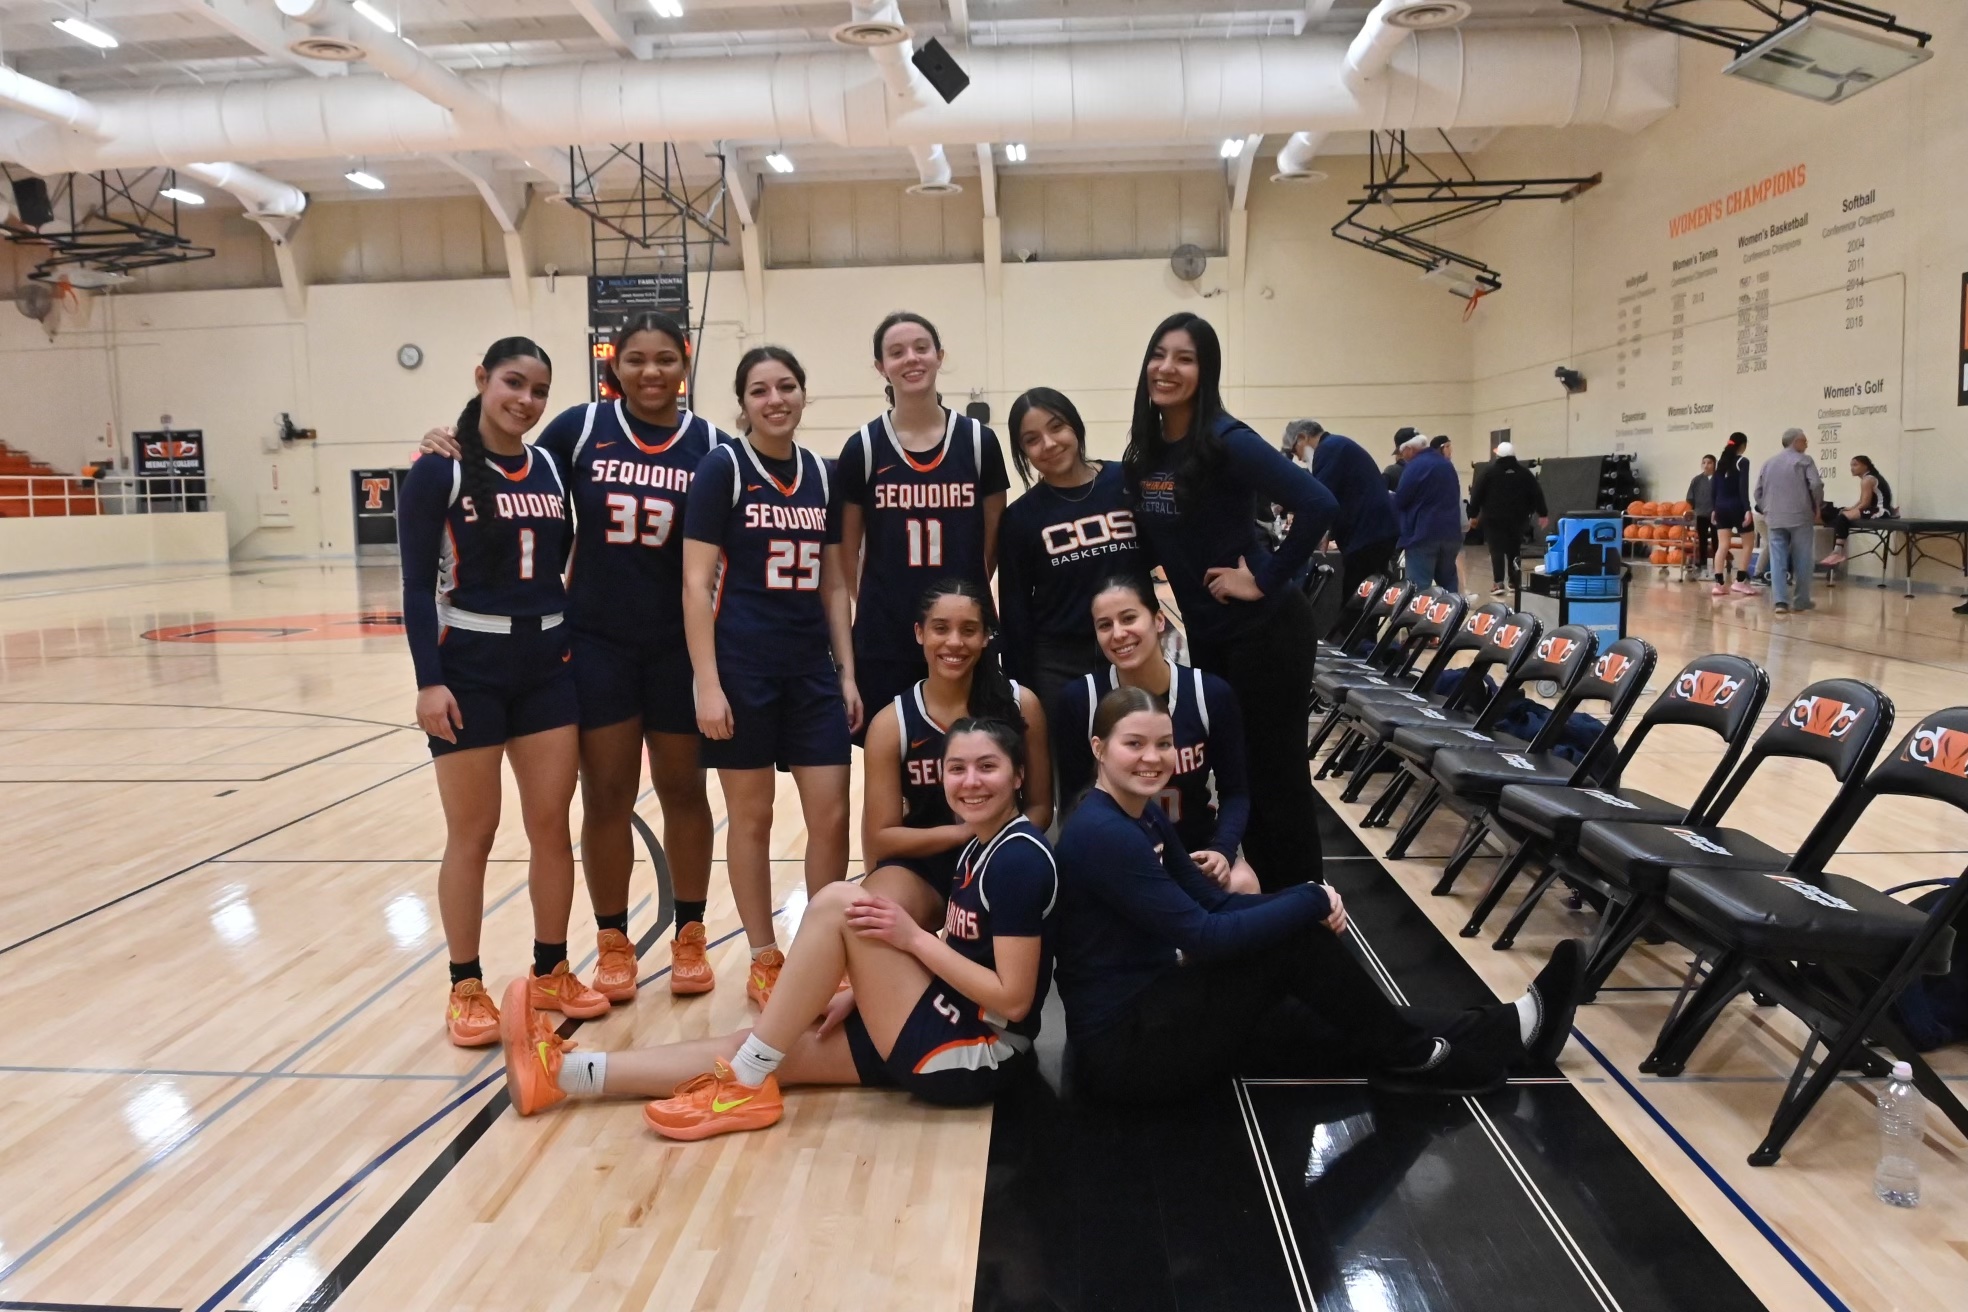 Giants women's basketball positioned to extend NorCal Regional playoff berth streak